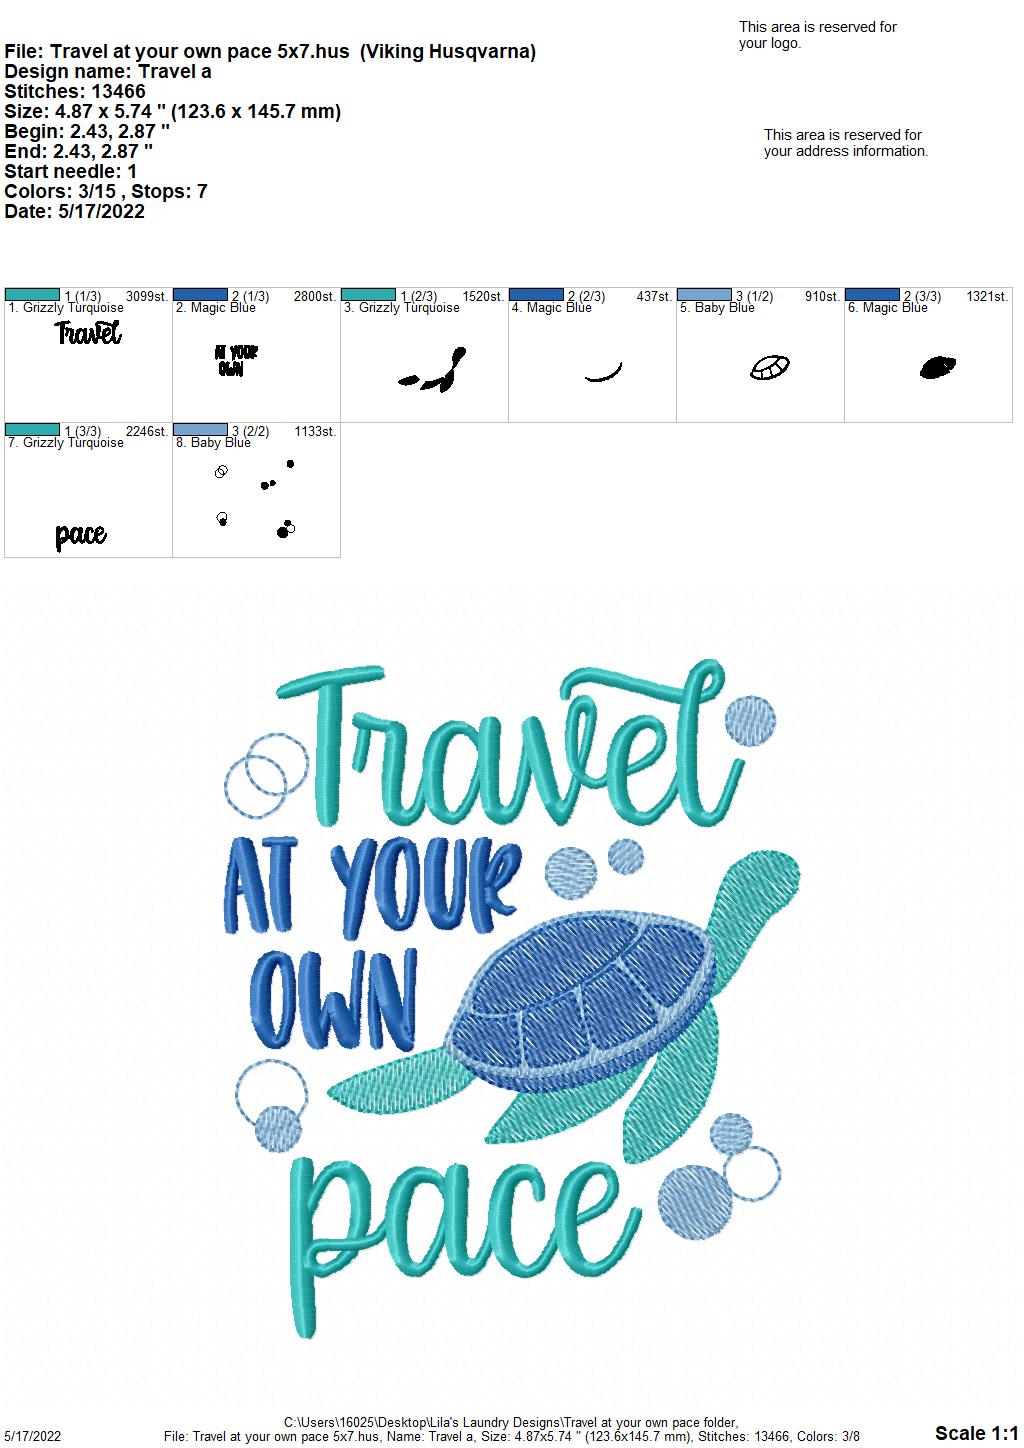 Travel At Your Own Pace - 4 sizes- Digital Embroidery Design